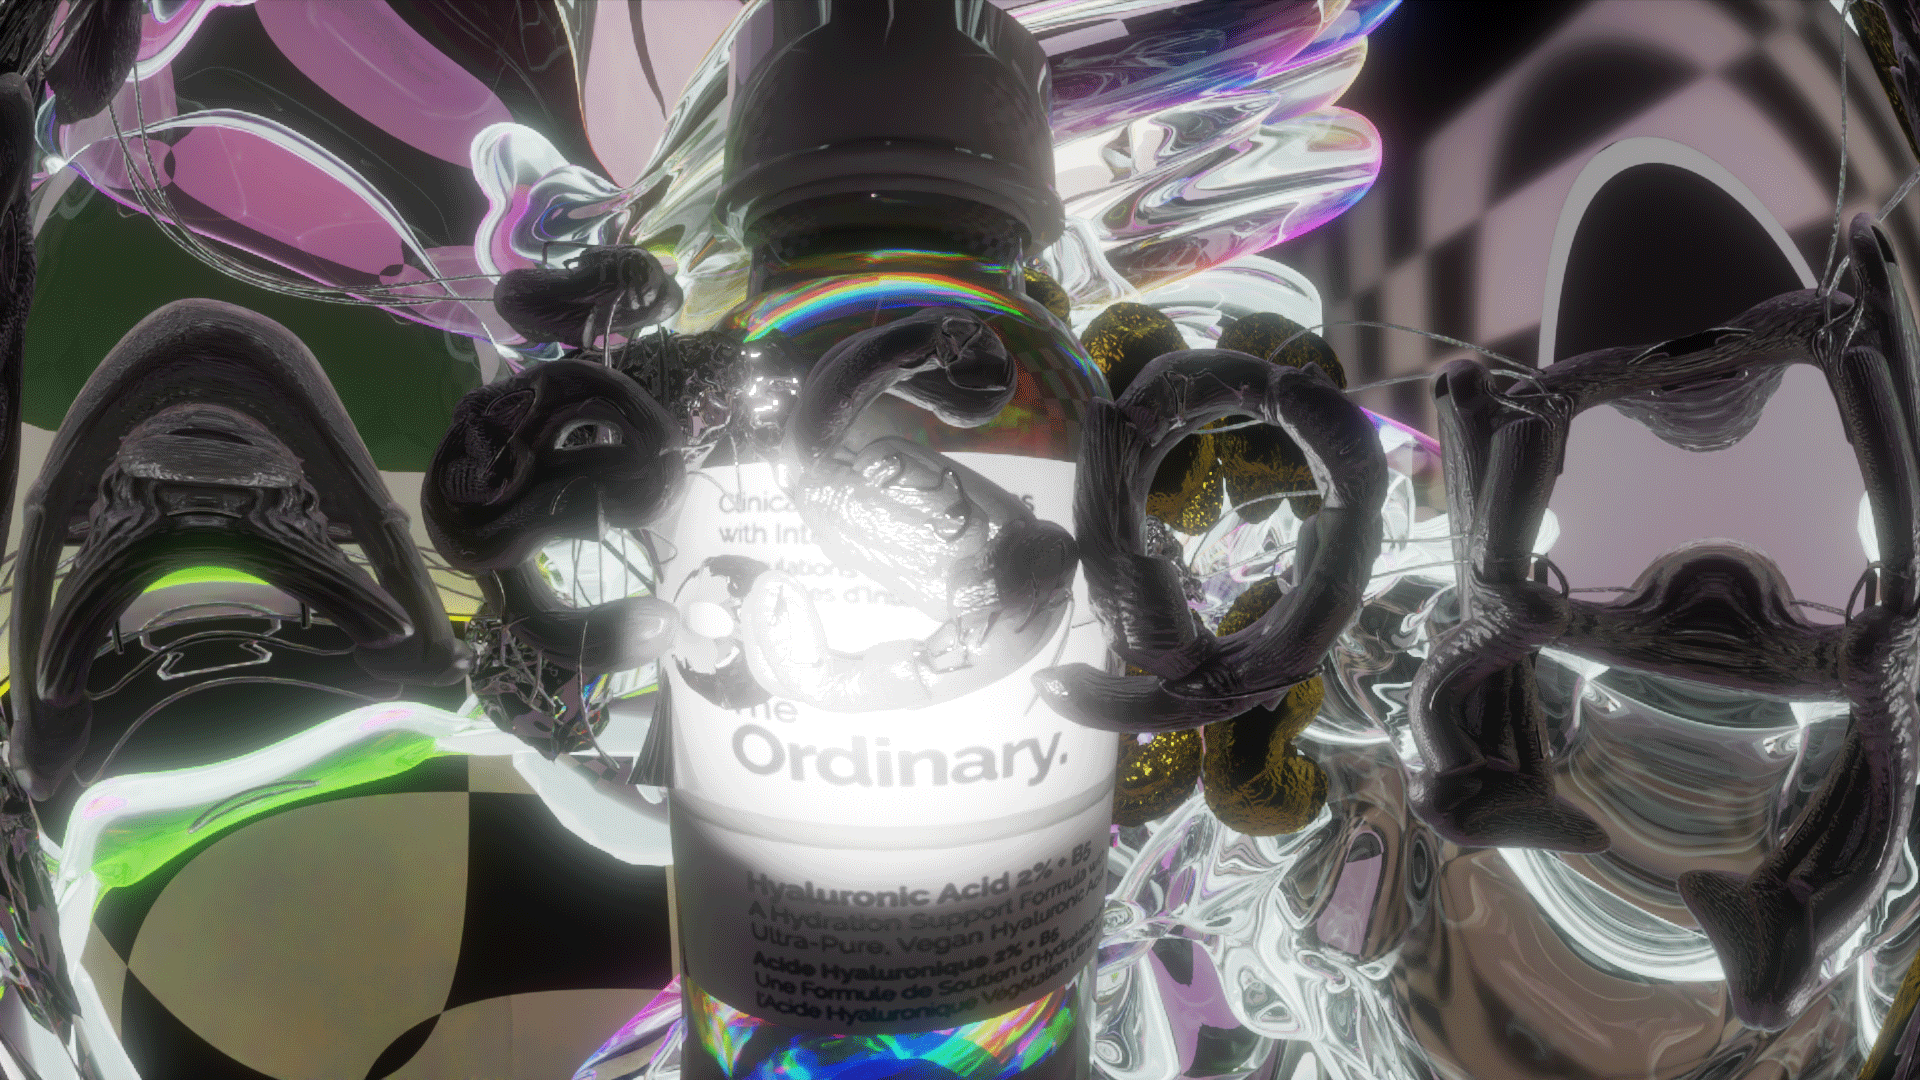 Colourful image still showing a The Ordinary bottle, Starface typography and an Aesop logo.